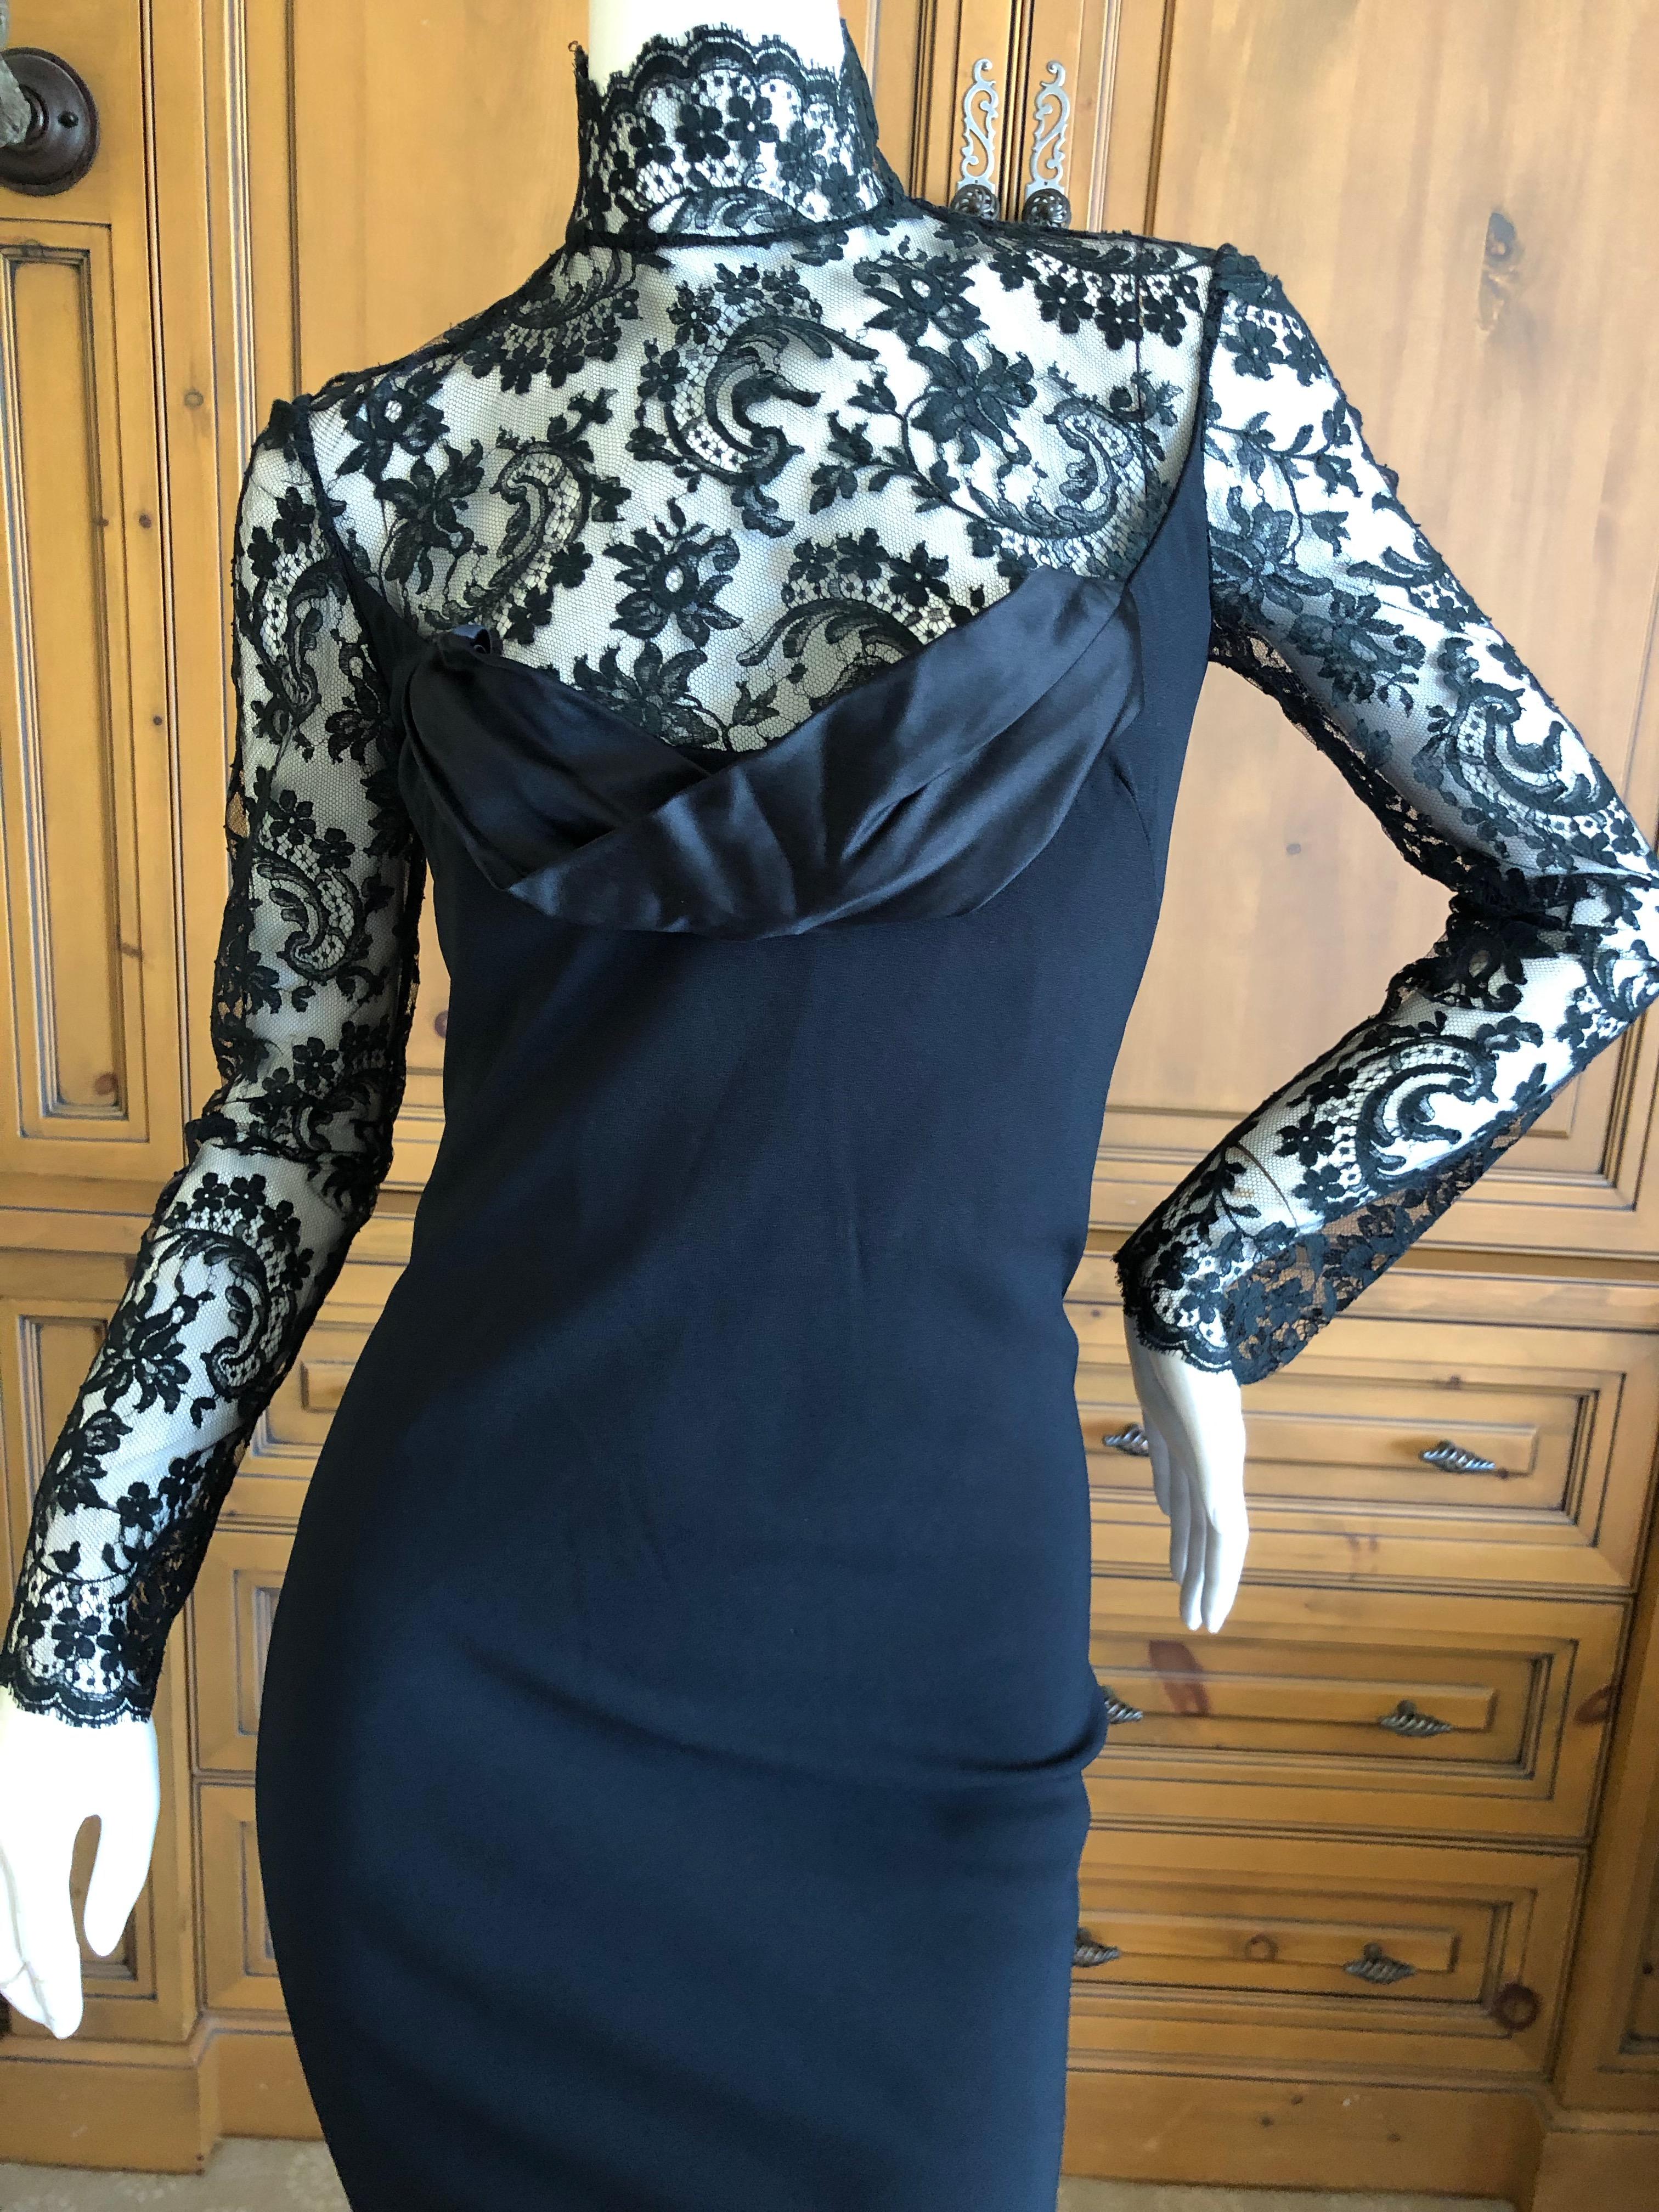 Givenchy Haute Couture by John Galliano Black Lace Cocktail Dress For Sale 4